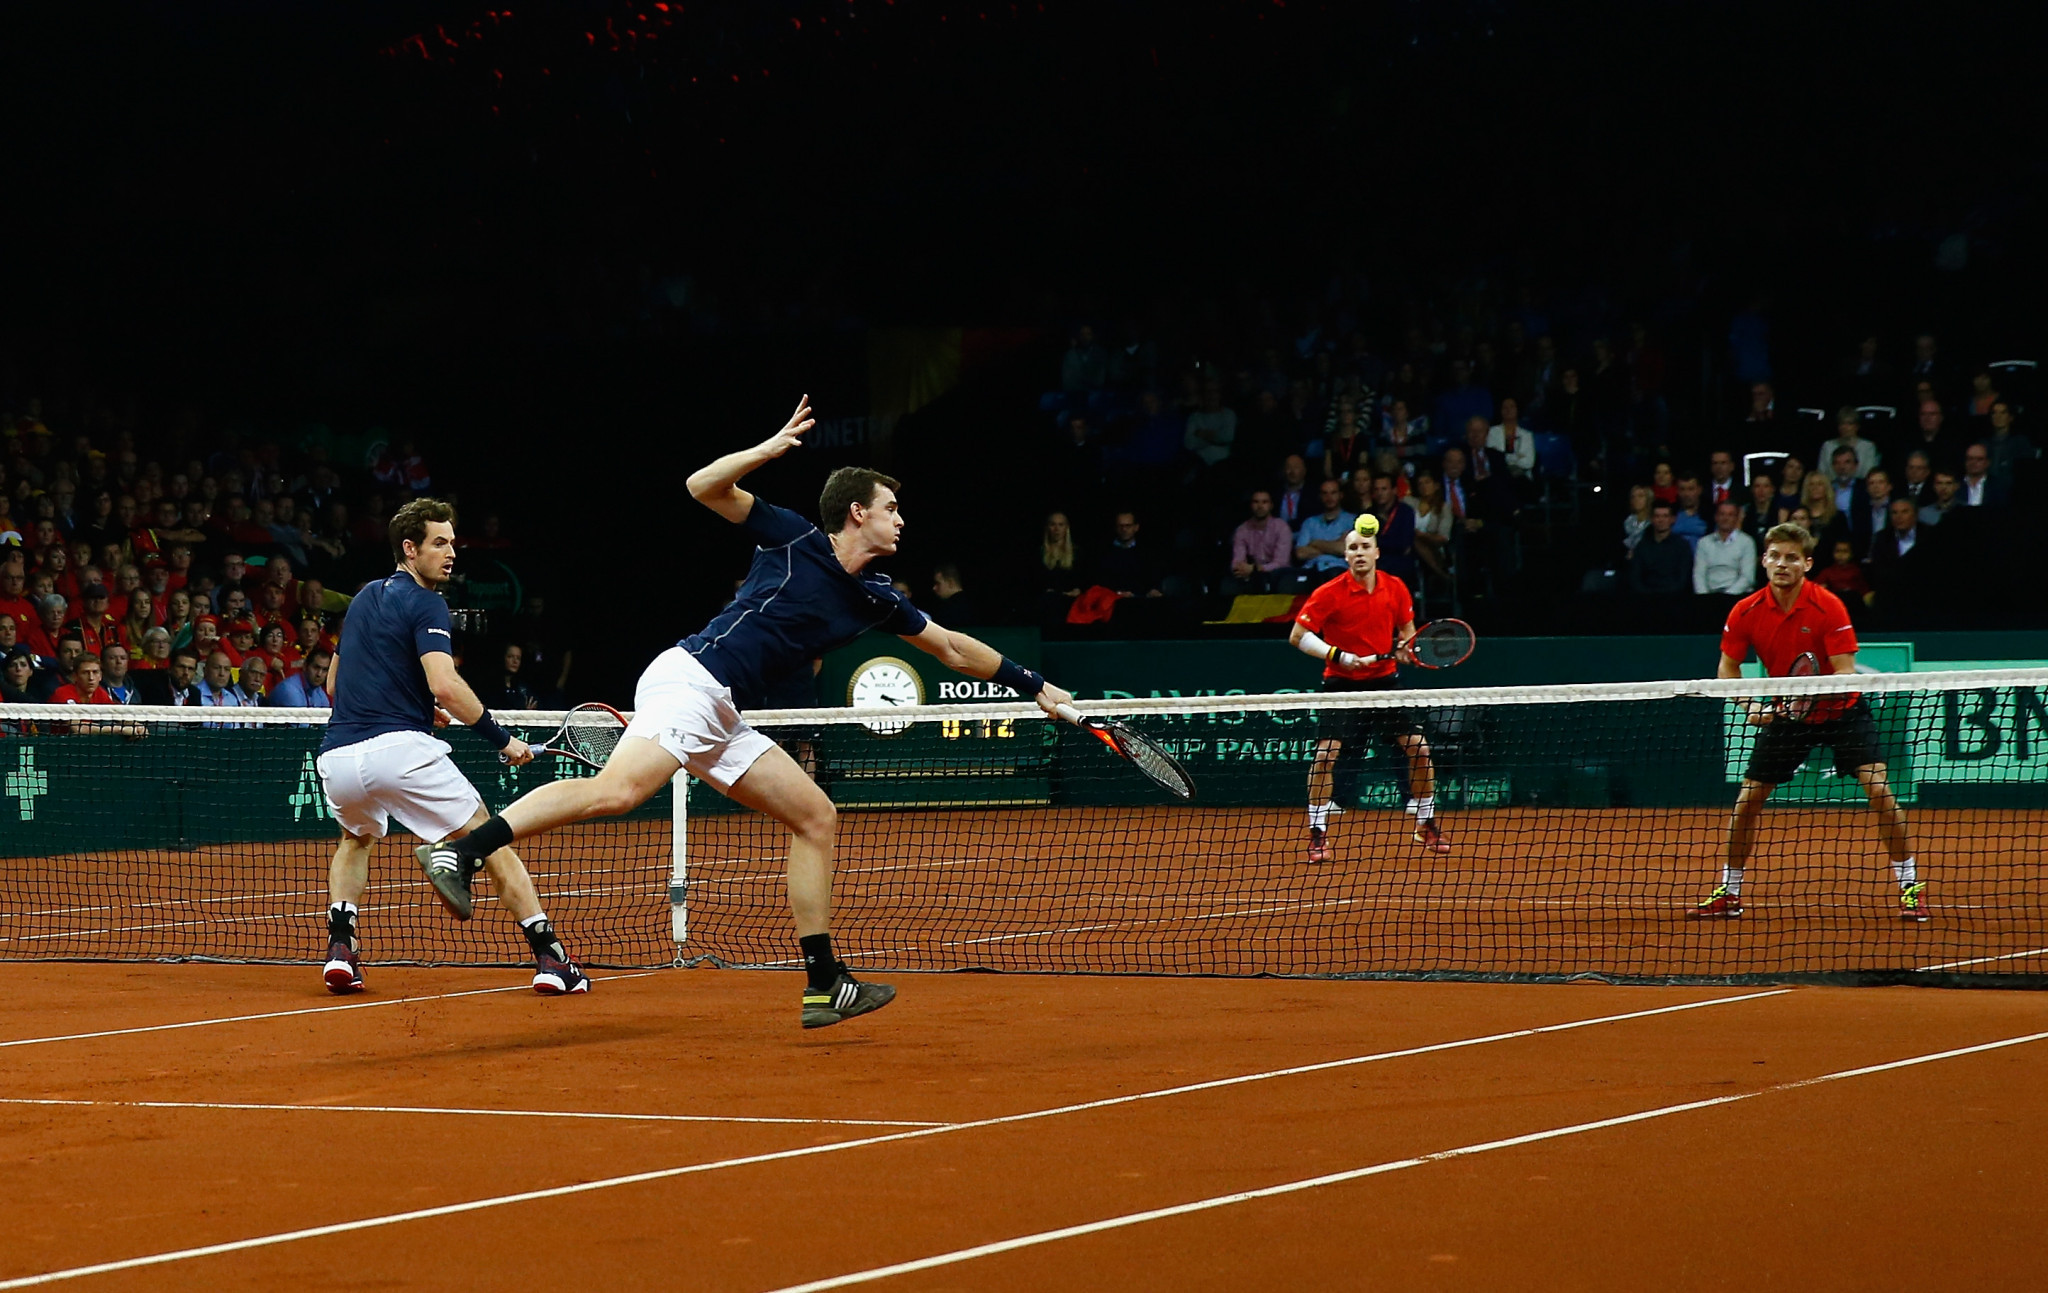 Doubles is only really meaningful when it takes place in an event like the Davis Cup, such as 2015 when brothers Andy and Jamie Murray teamed-up to help Britain beat Belgium in the final ©Getty Images